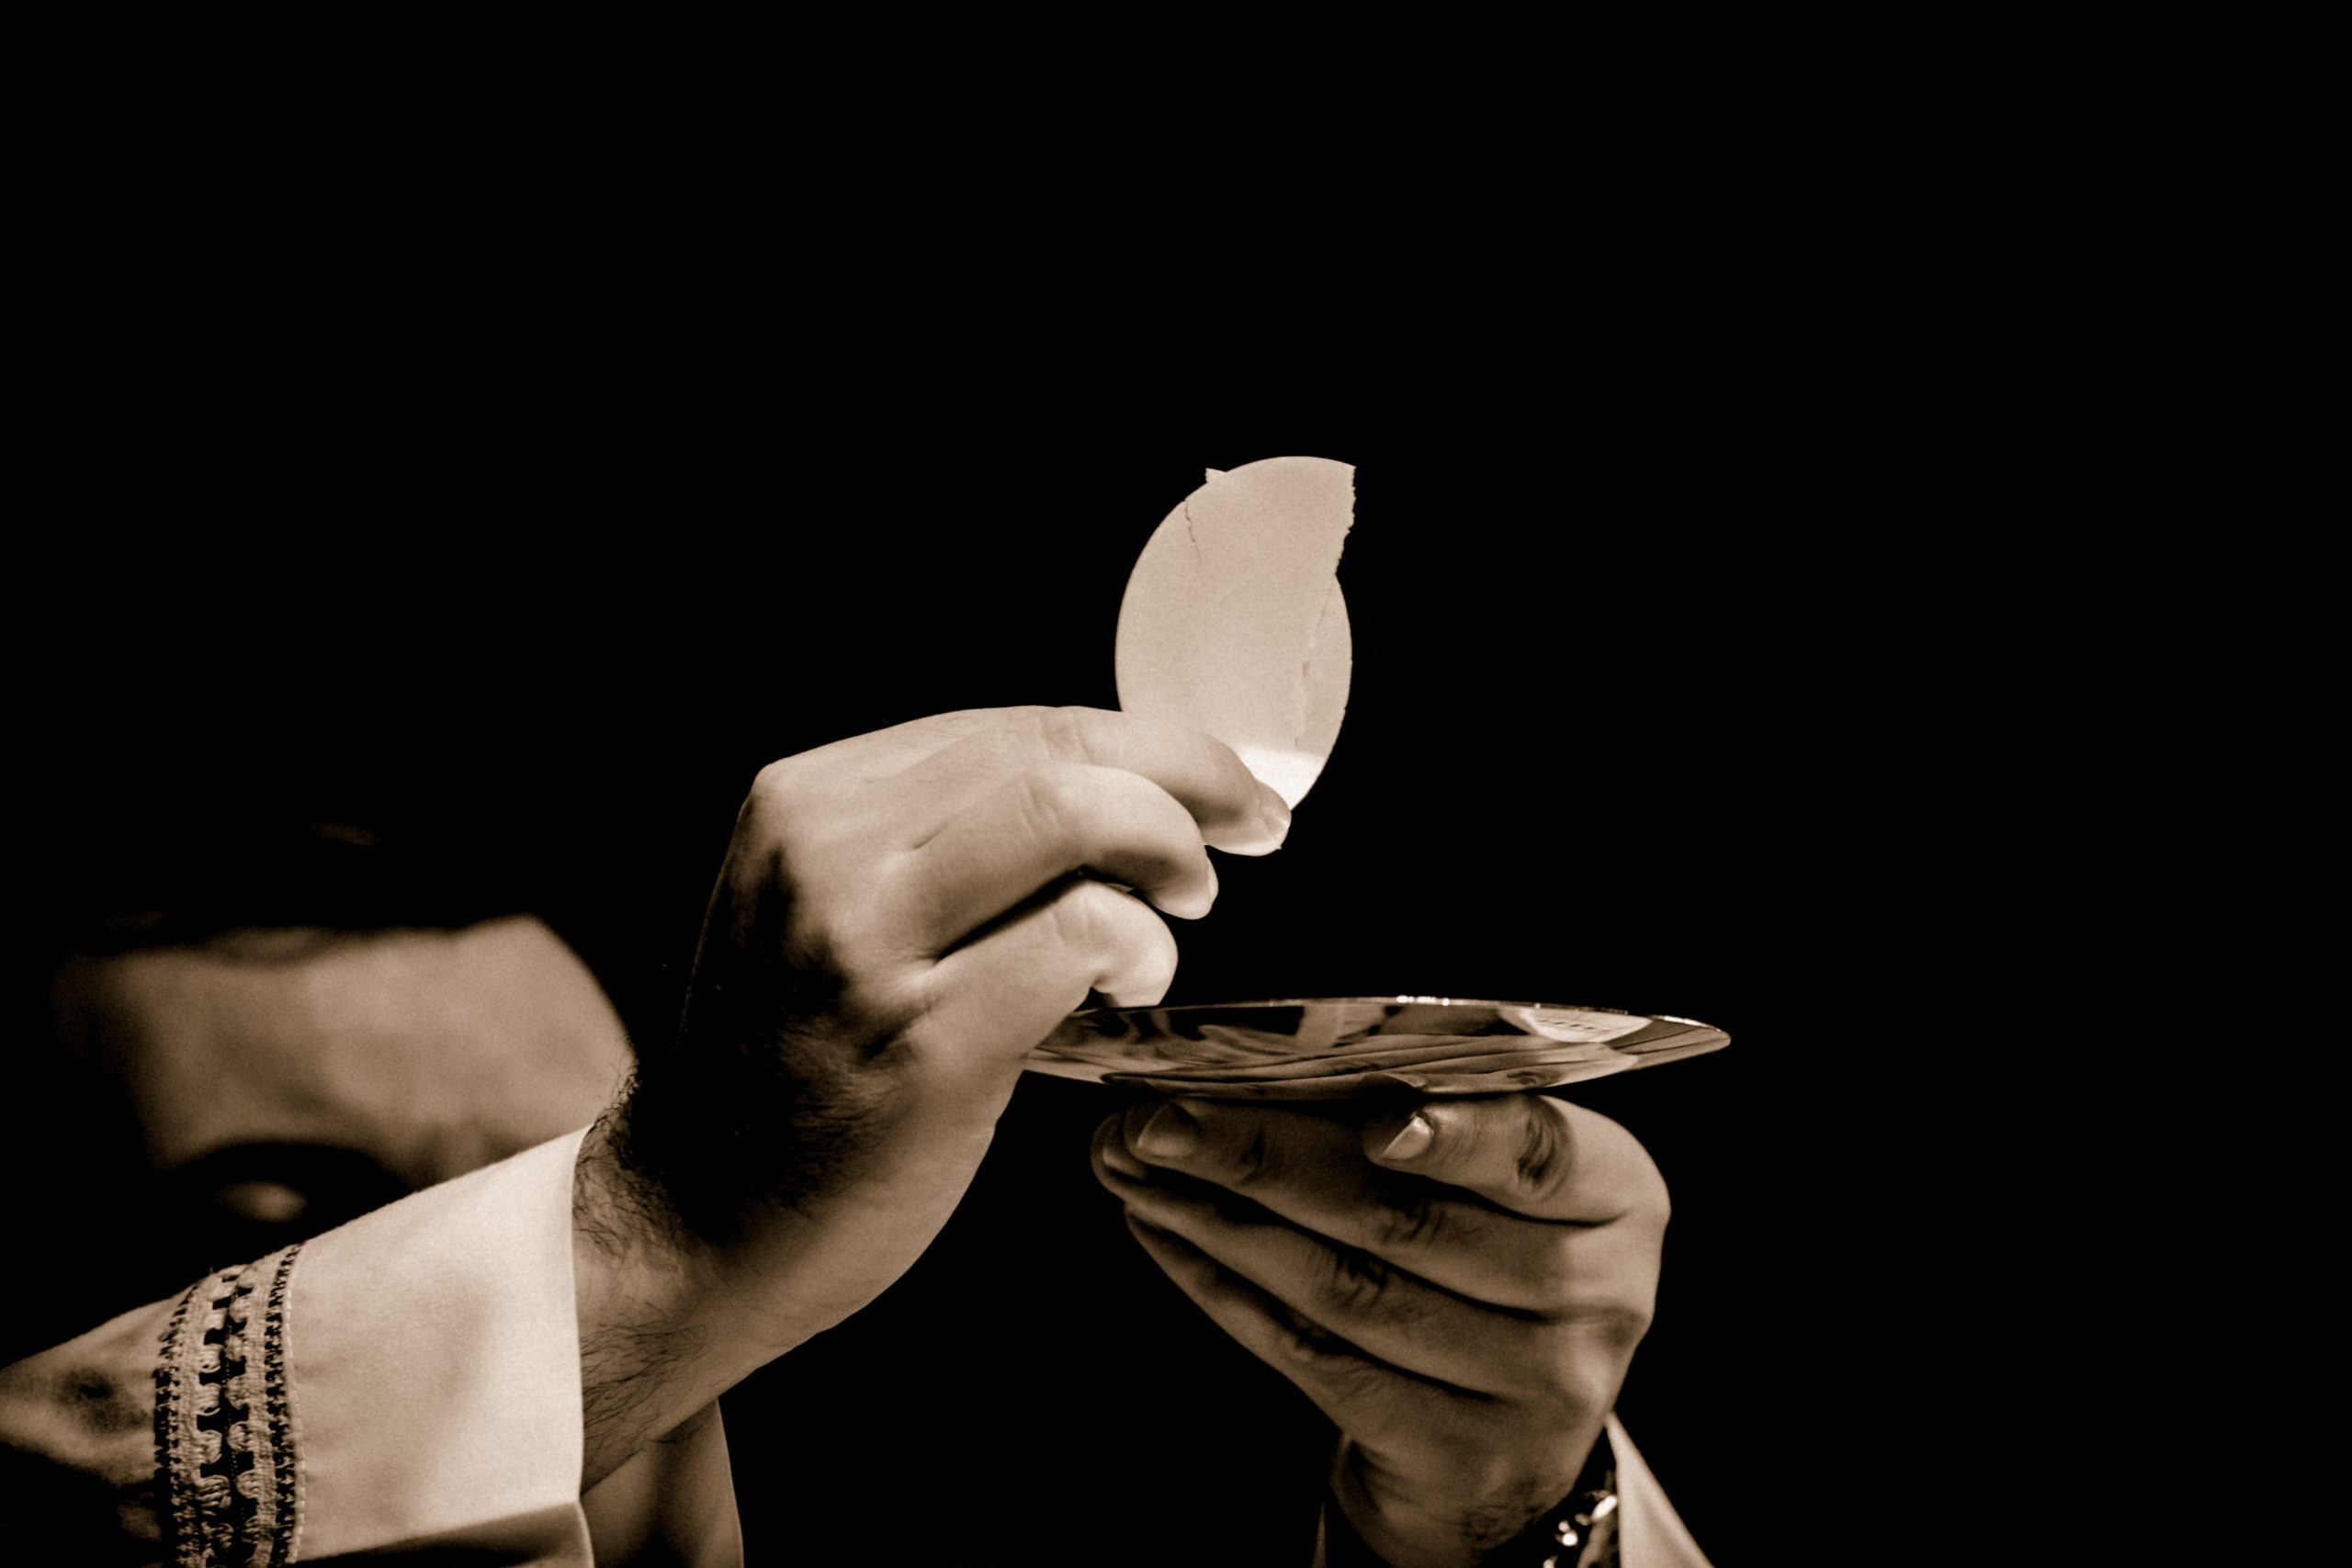 Image: hands holding the Body of Christ with black background